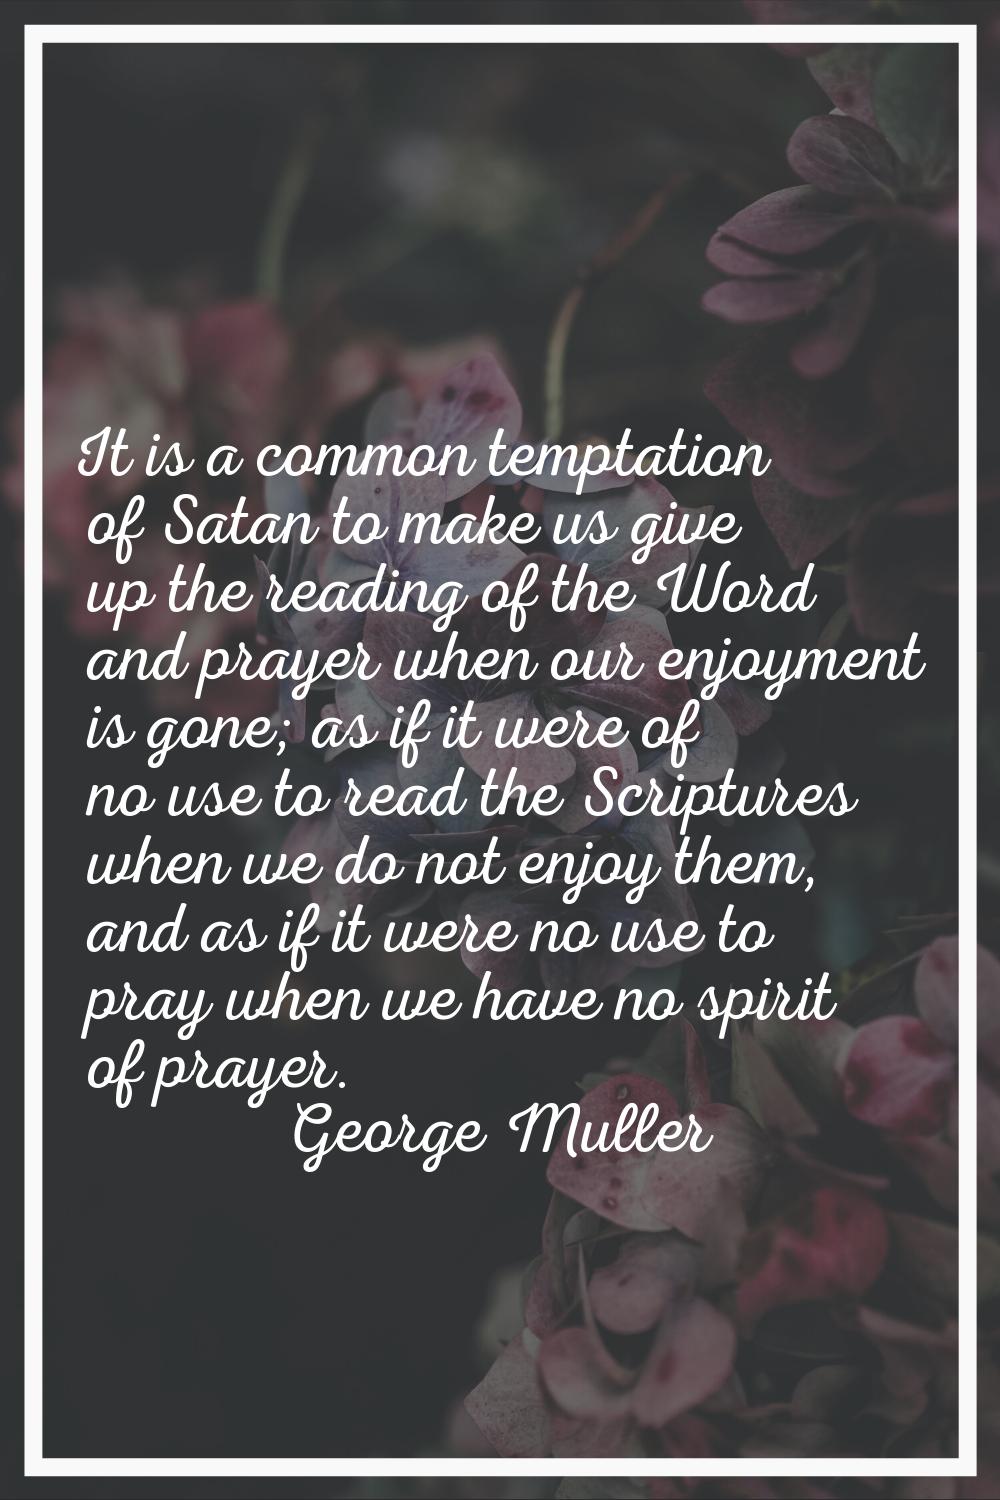 It is a common temptation of Satan to make us give up the reading of the Word and prayer when our e